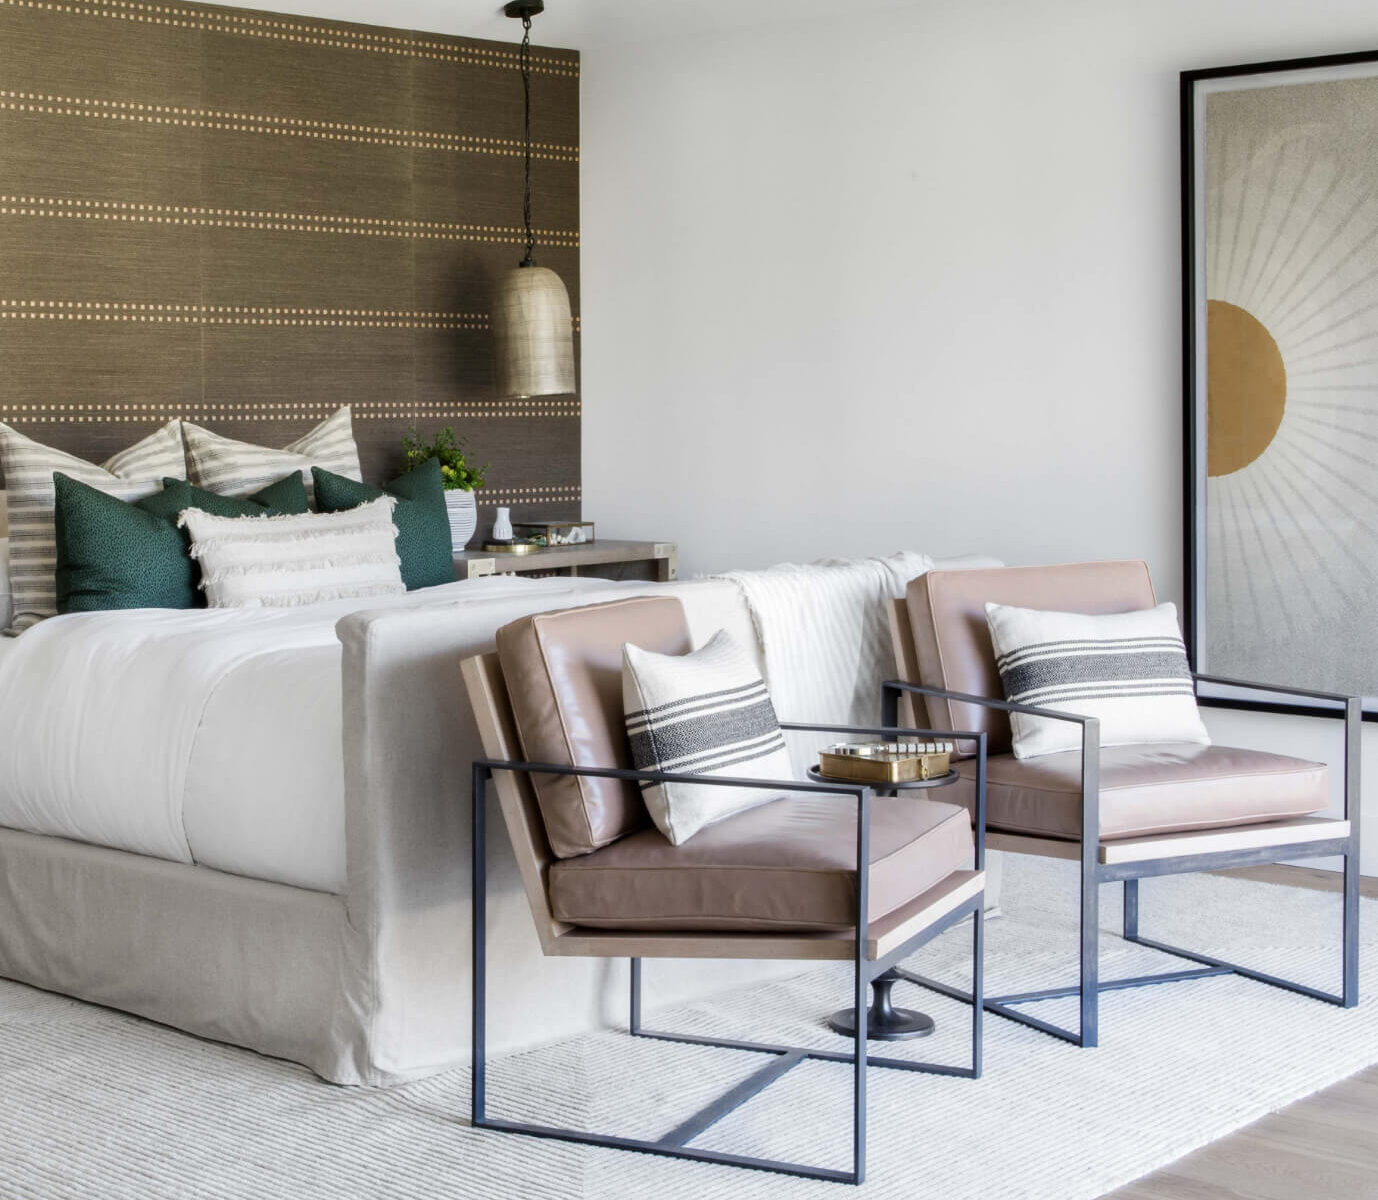 Luxury master bedroom featuring a spanish modern interior design with textured pillows on king sized bed and contemporary leather lounge chairs with a woven natural wallpaper